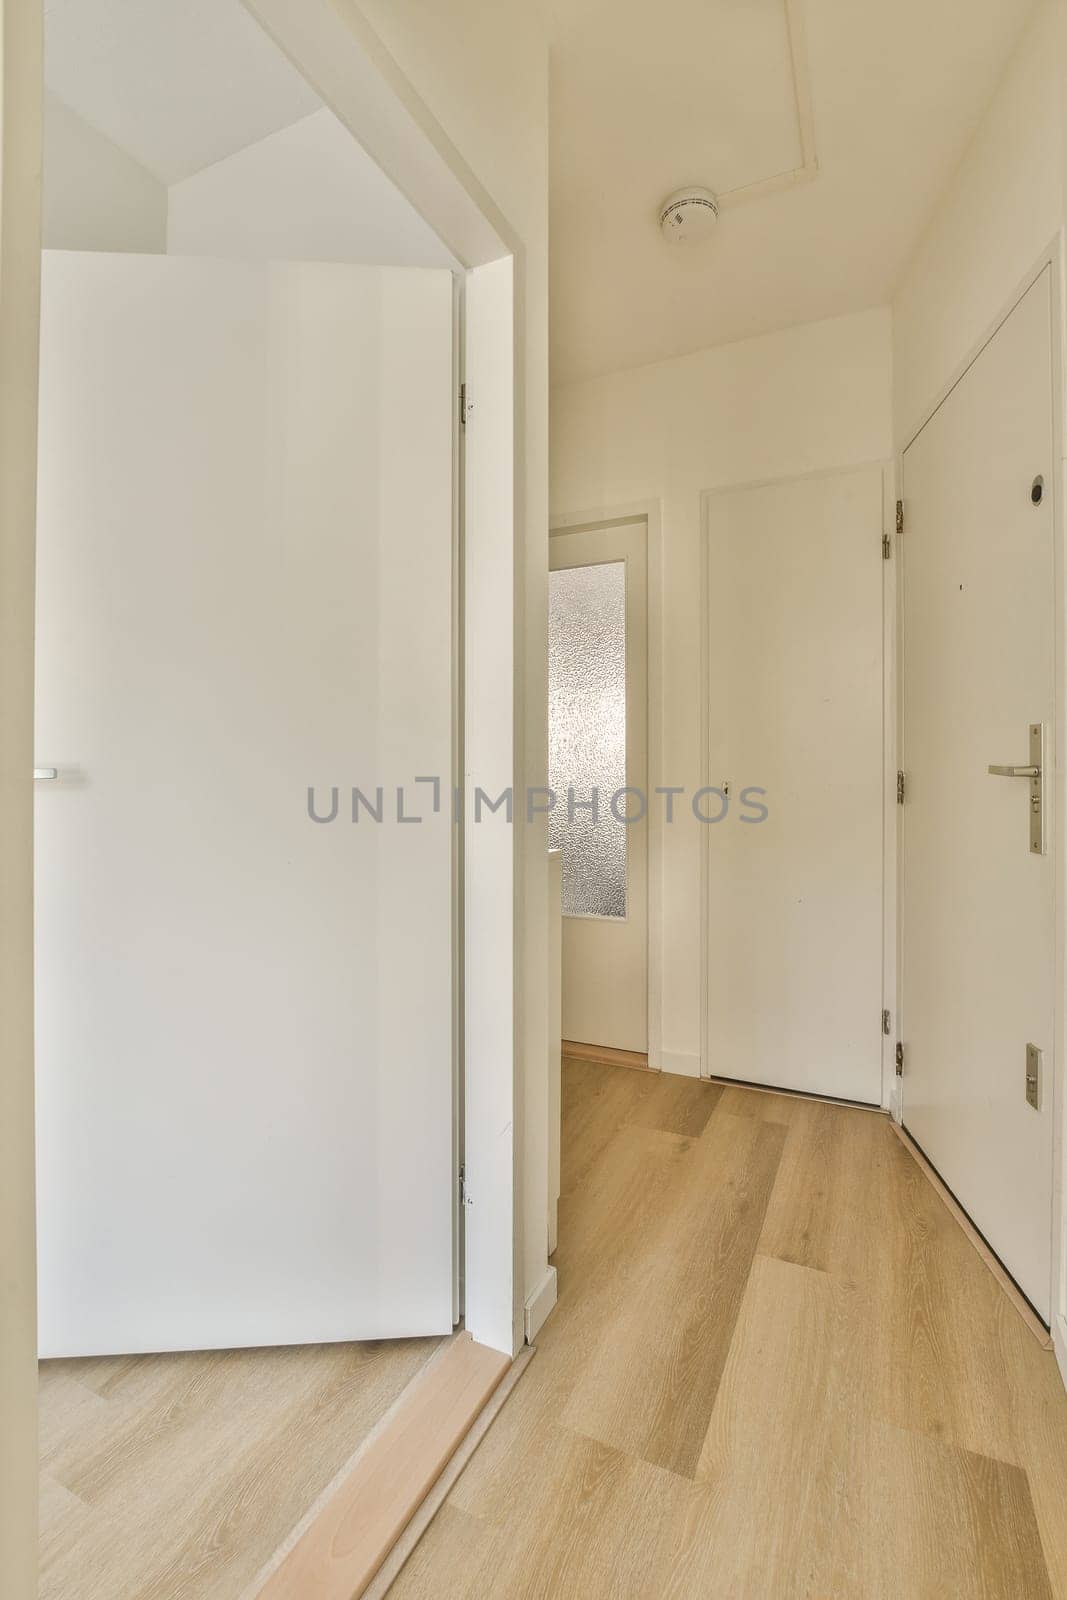 an empty room with white walls and wood flooring on the right side of the room, there is a door to the left